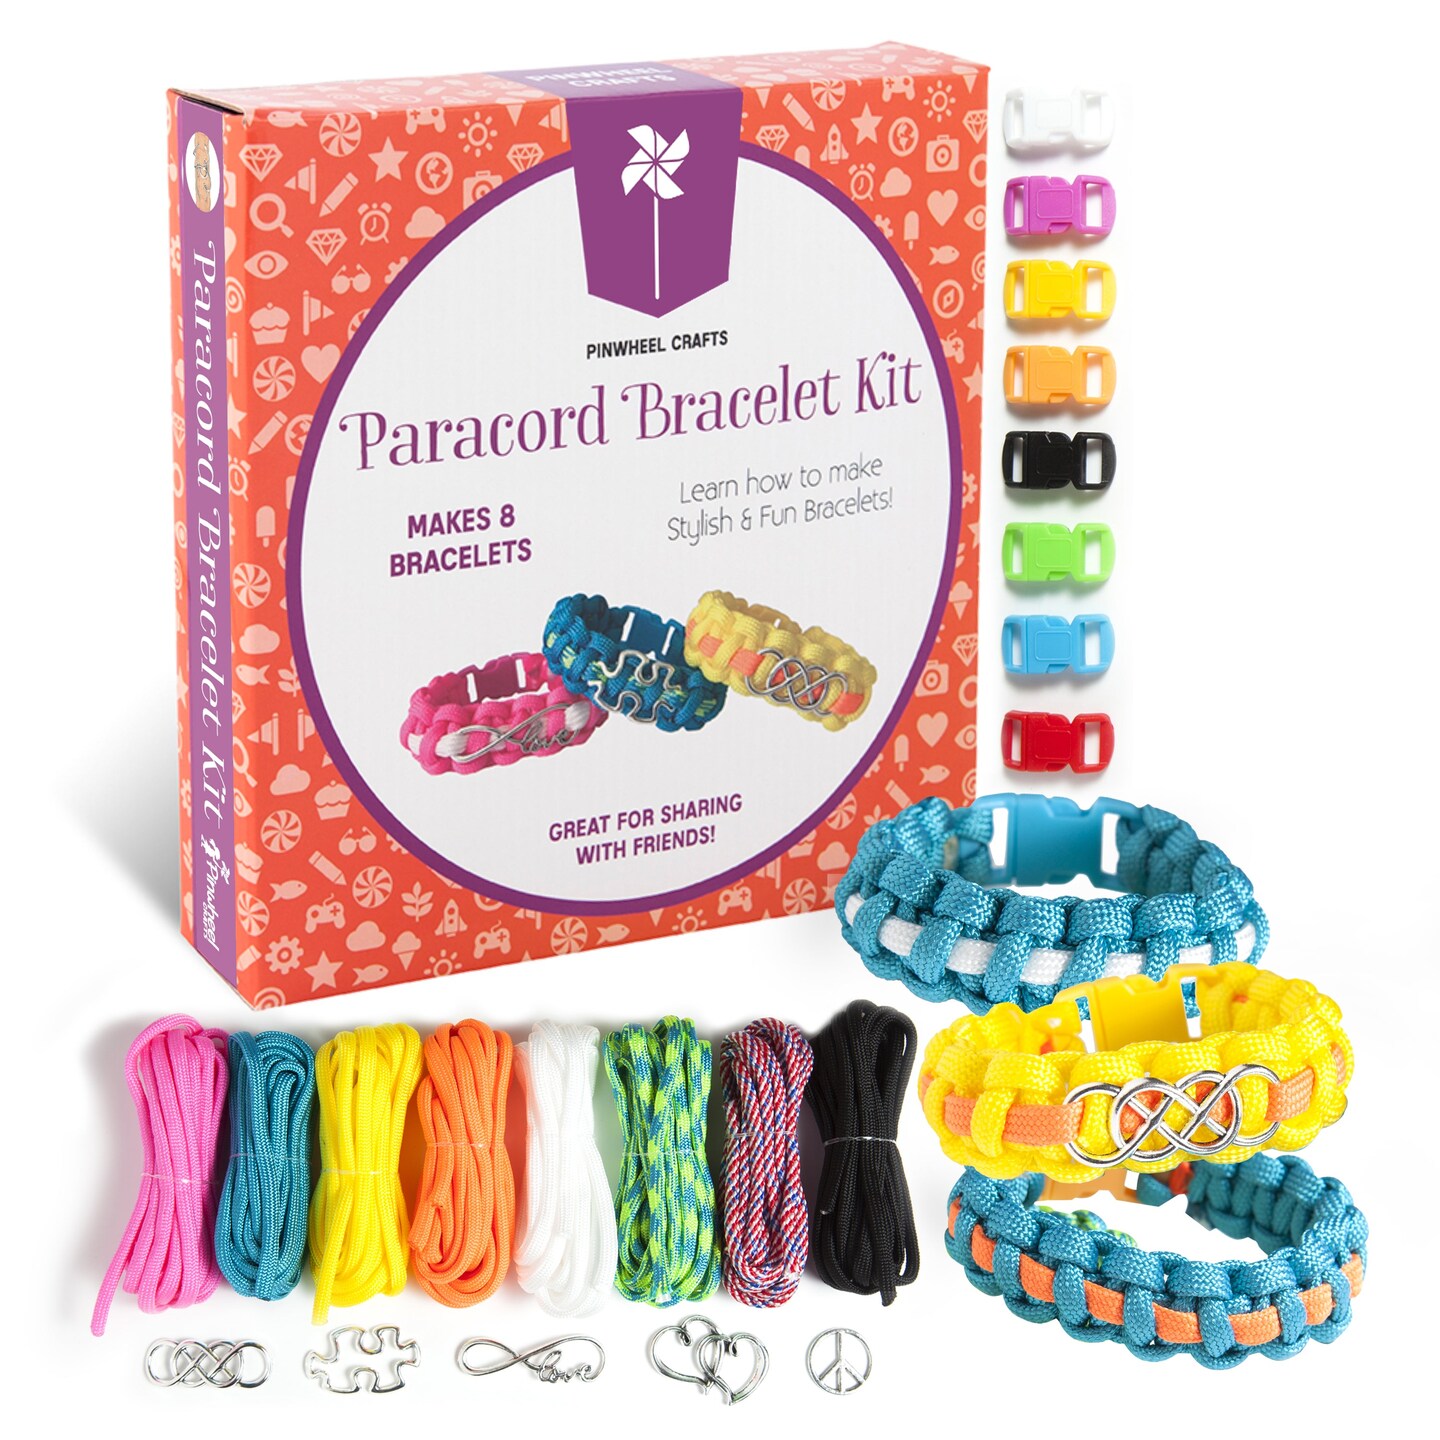 Micro Paracord Bracelet Kit 51 - Solid Colors (B) – Paracord Galaxy